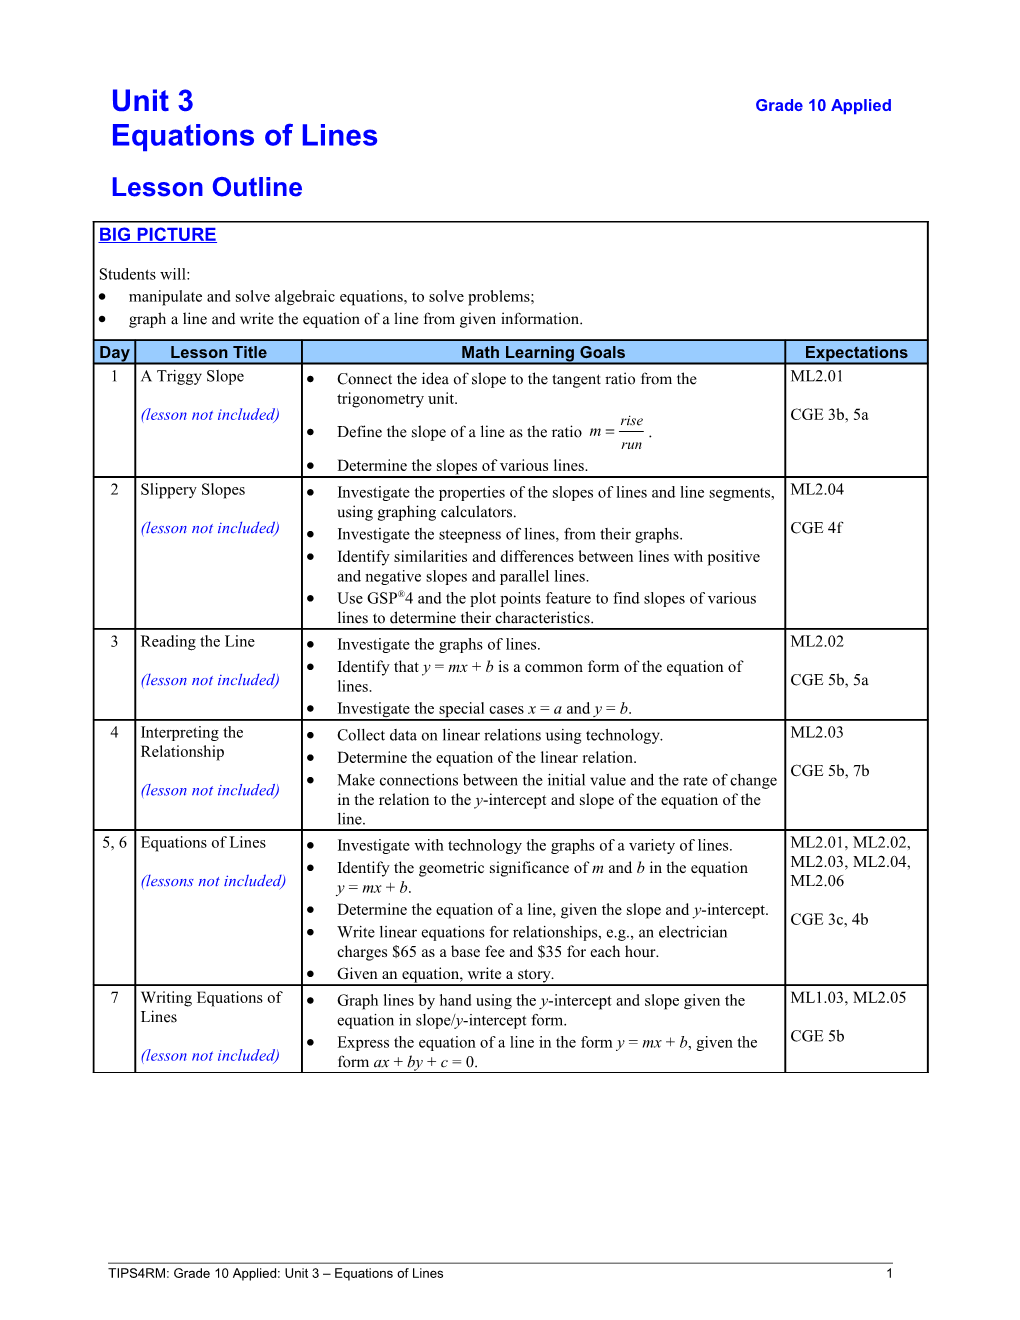 Interpreting the Lesson Outline Template